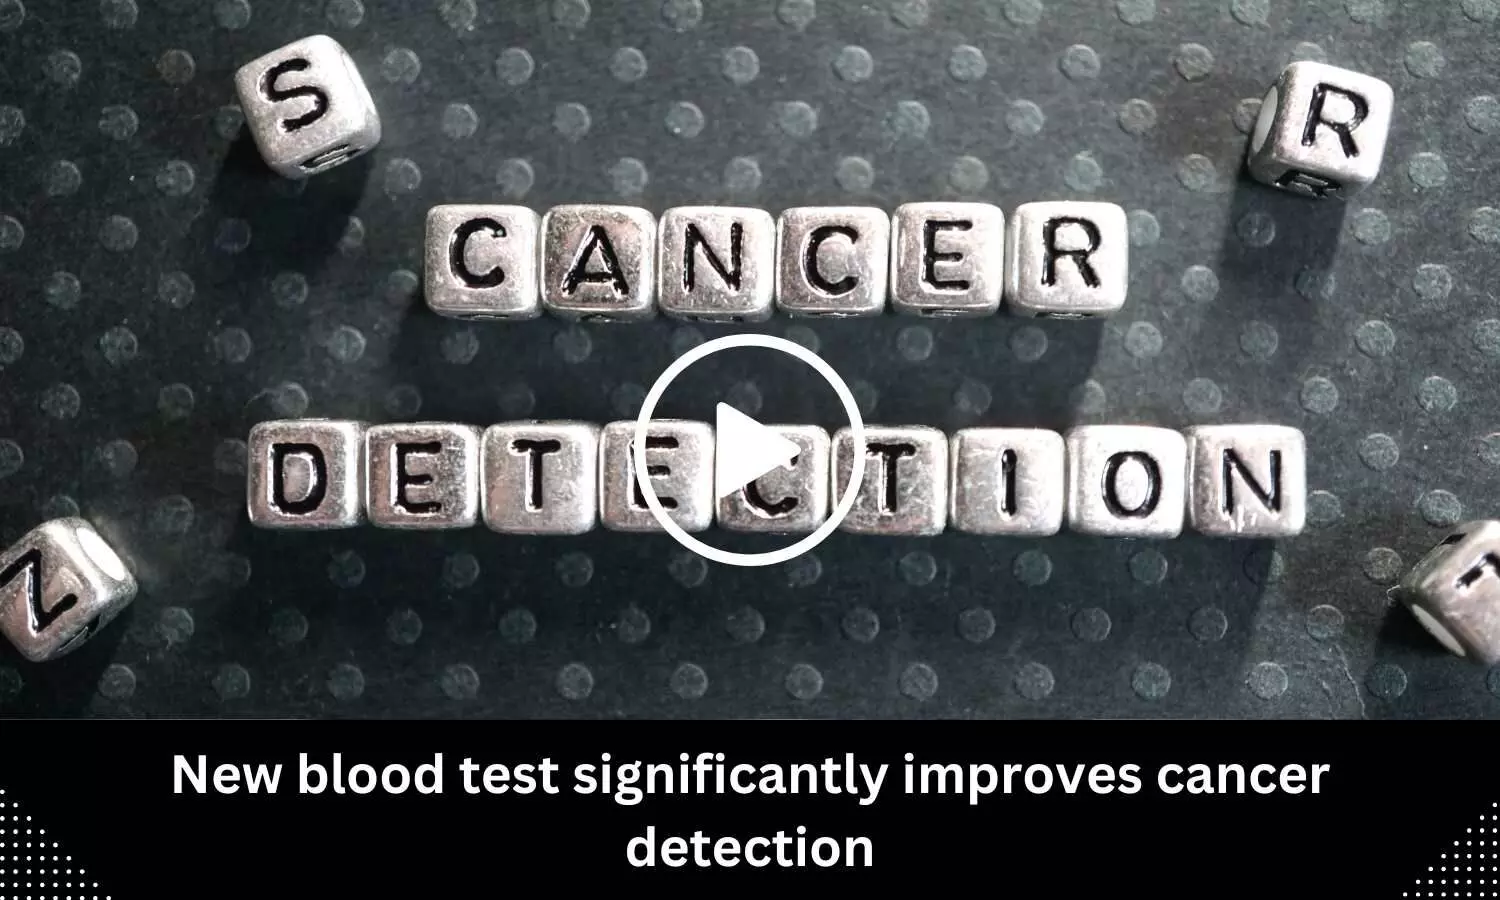 New blood test significantly improves cancer detection